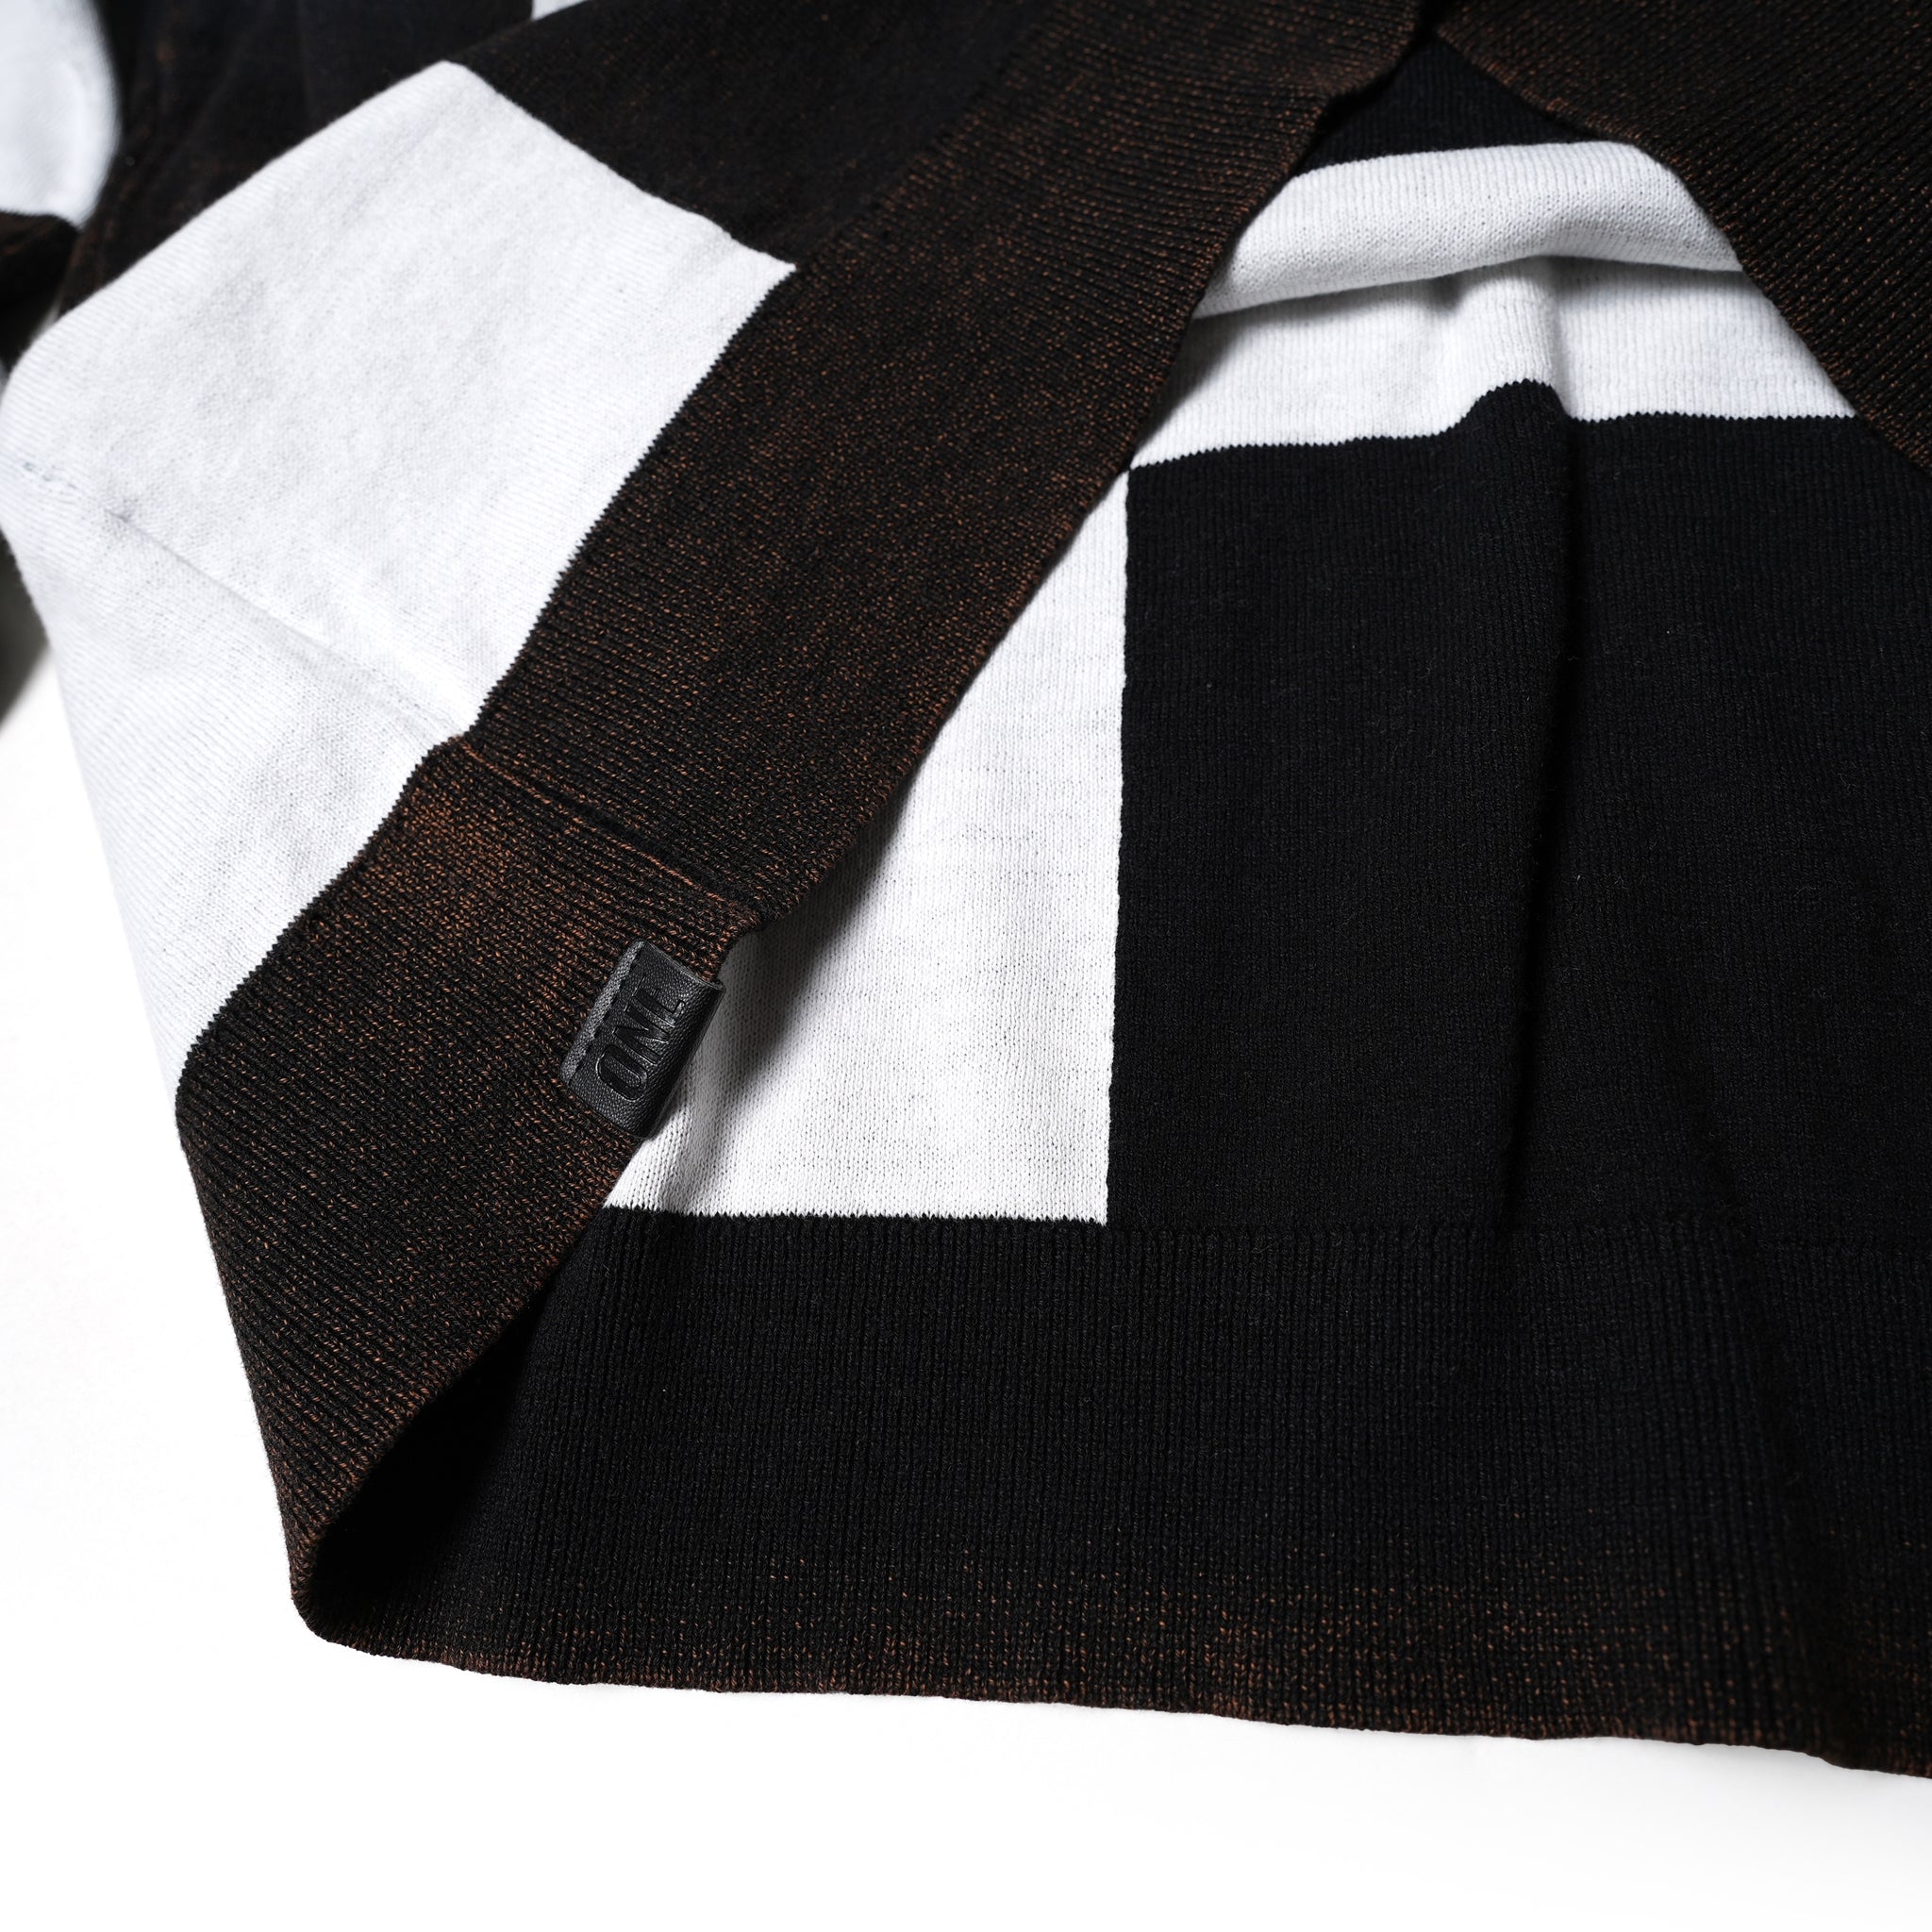 No:25576 | Name:SCOREBOARD SMILEY KNIT SWEATER | Color:Black White【ONE TEASPOON_ワンティースプーン】